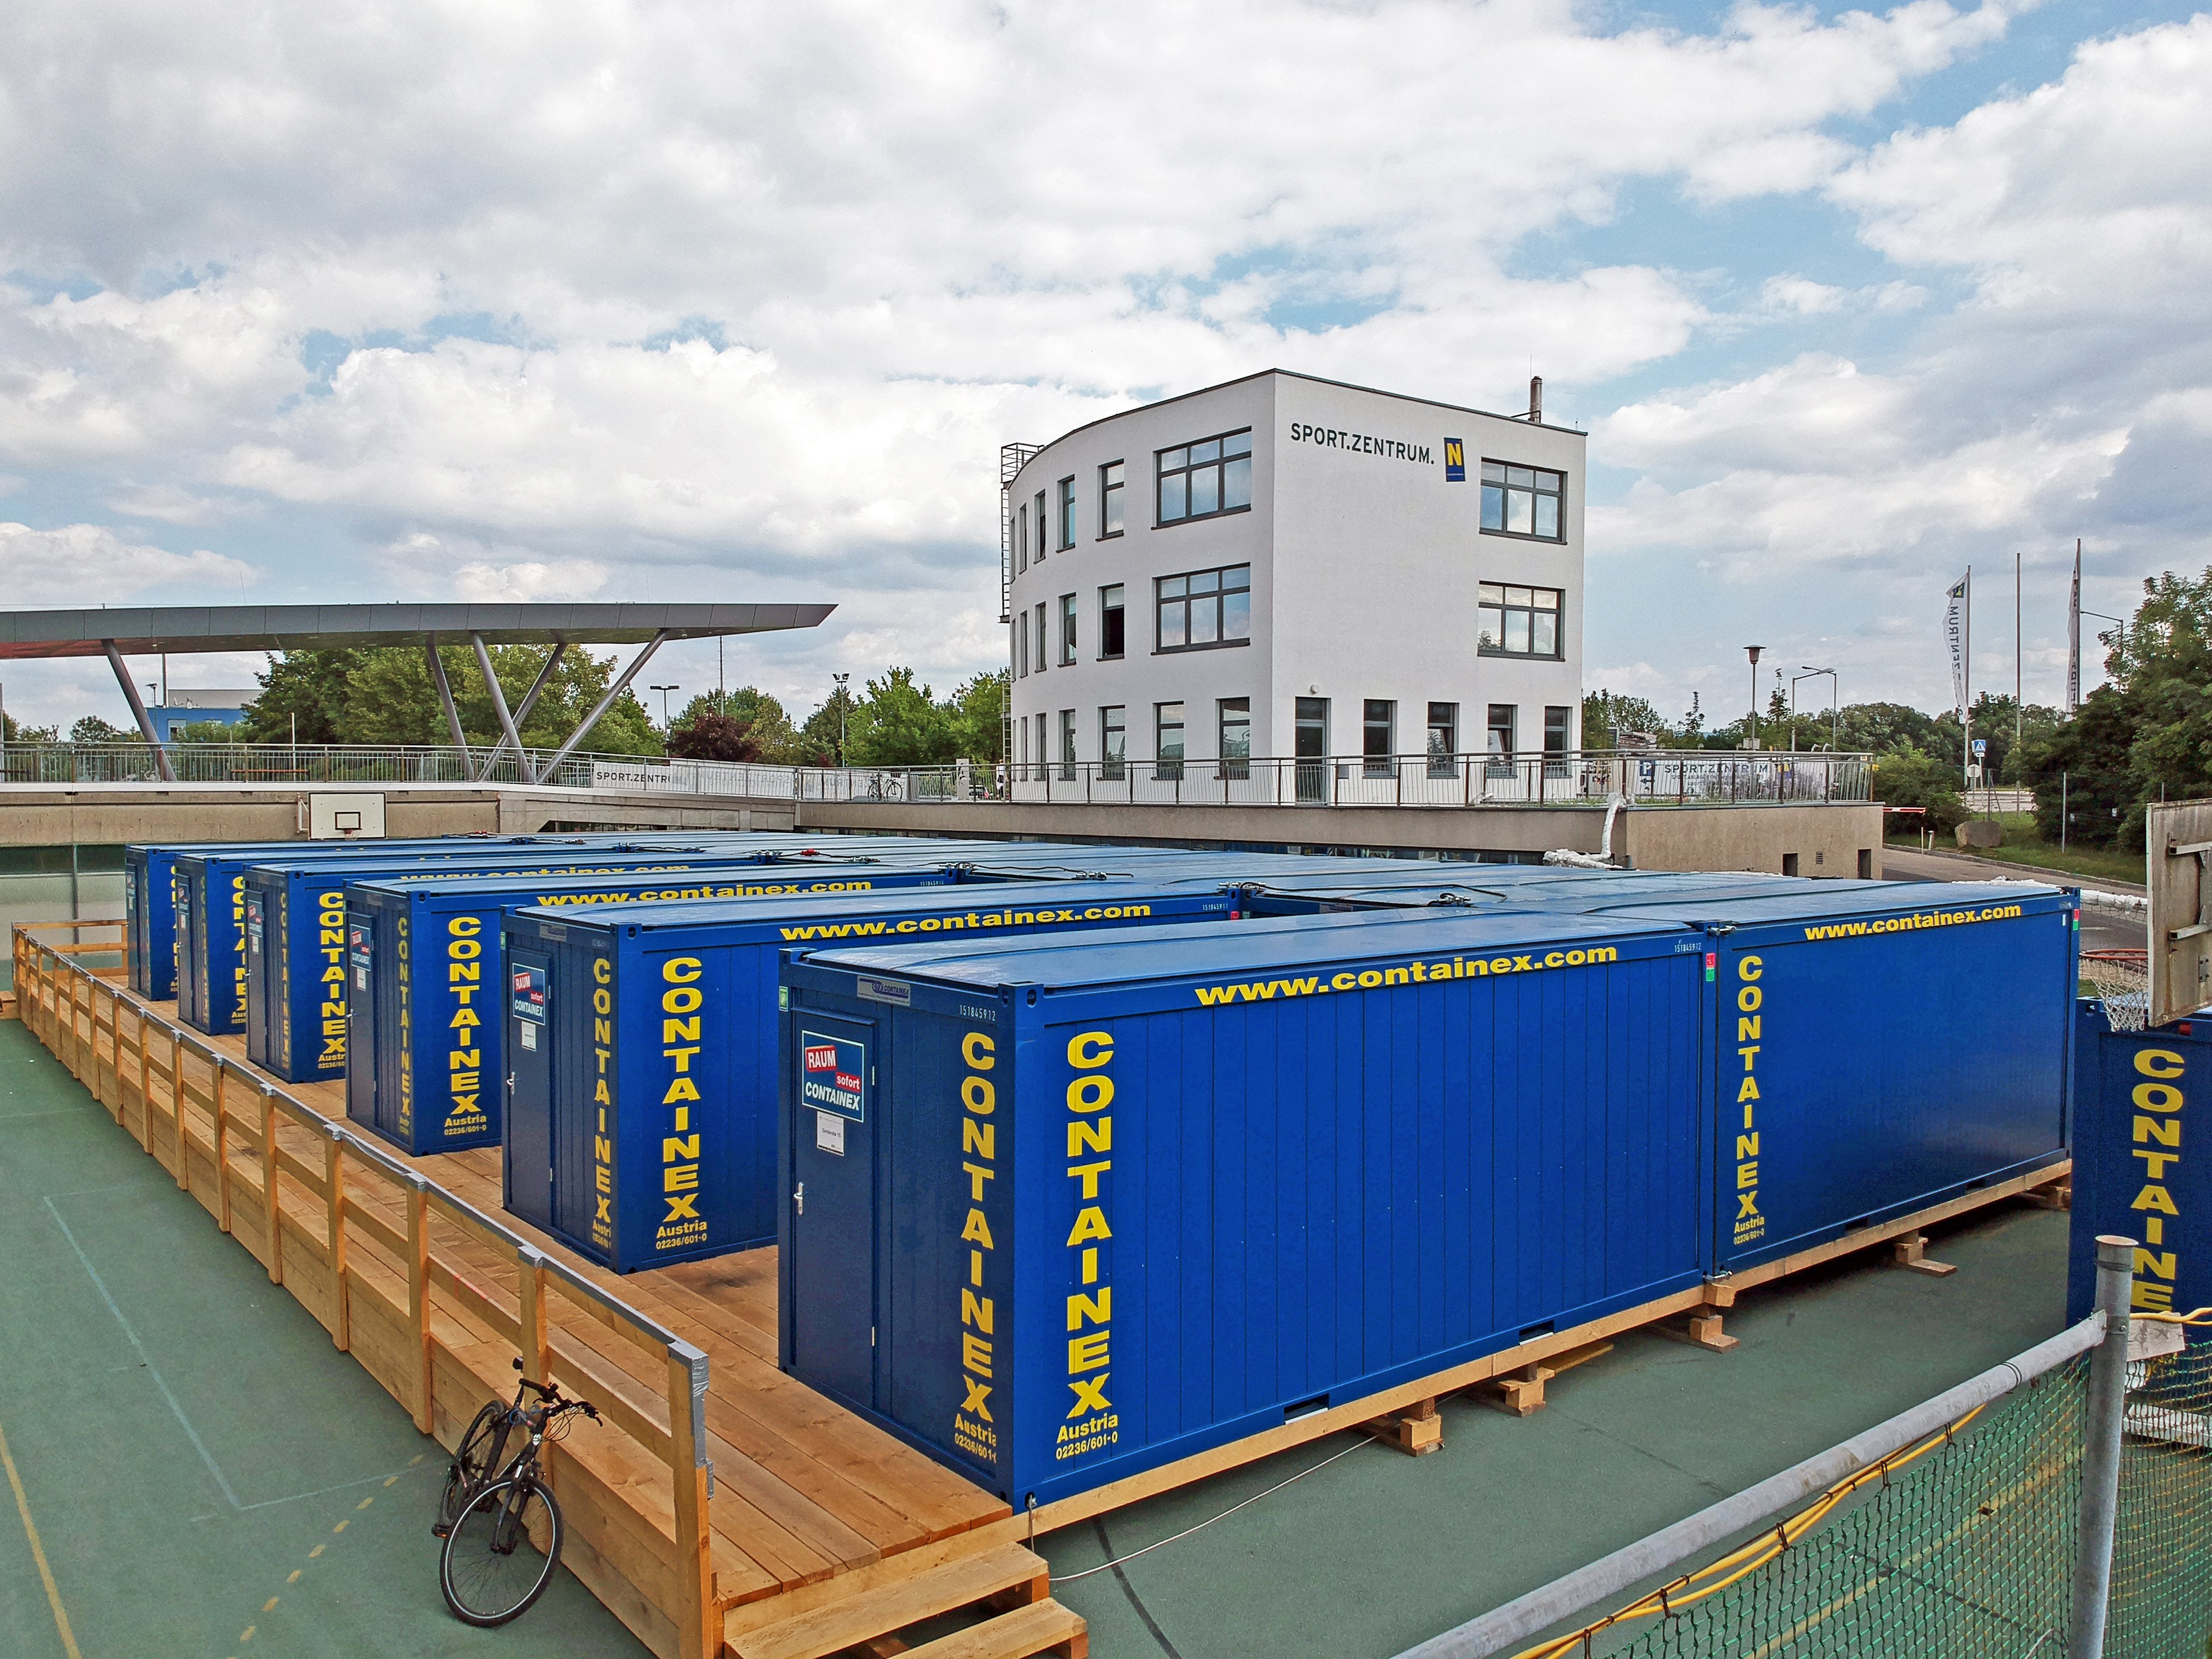 Hire cabins and containers: the temporary space solution